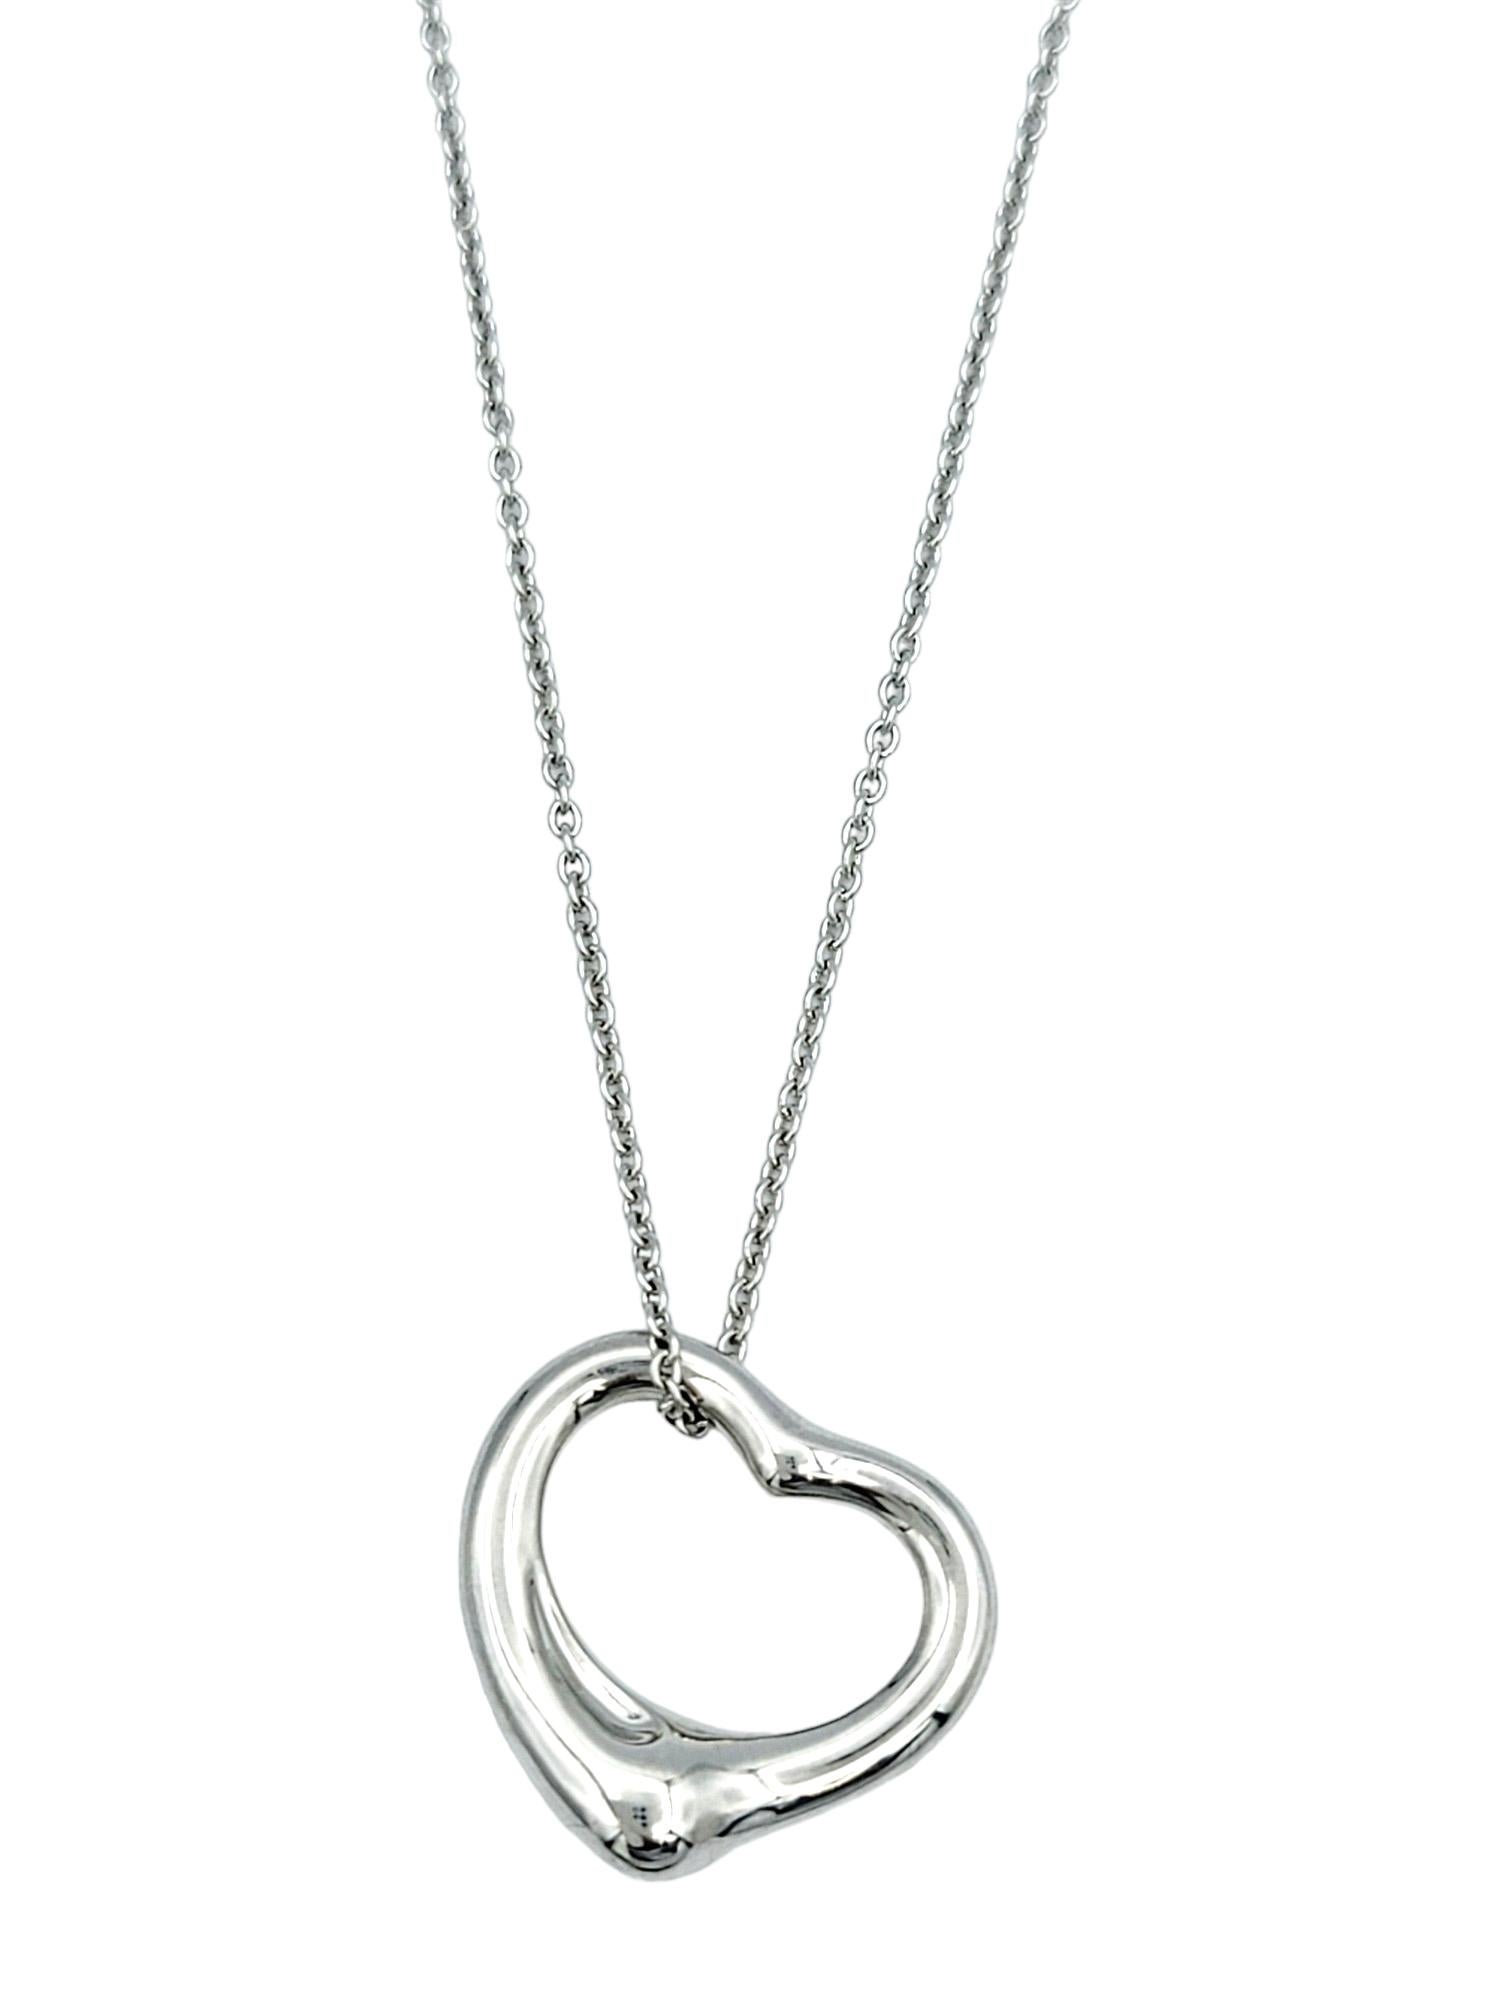 This Tiffany & Co. Elsa Peretti Open Heart Necklace, crafted in luxurious platinum, is a timeless and iconic piece of jewelry. Designed by the renowned artist Elsa Peretti, this necklace features a delicate open heart pendant that exudes elegance